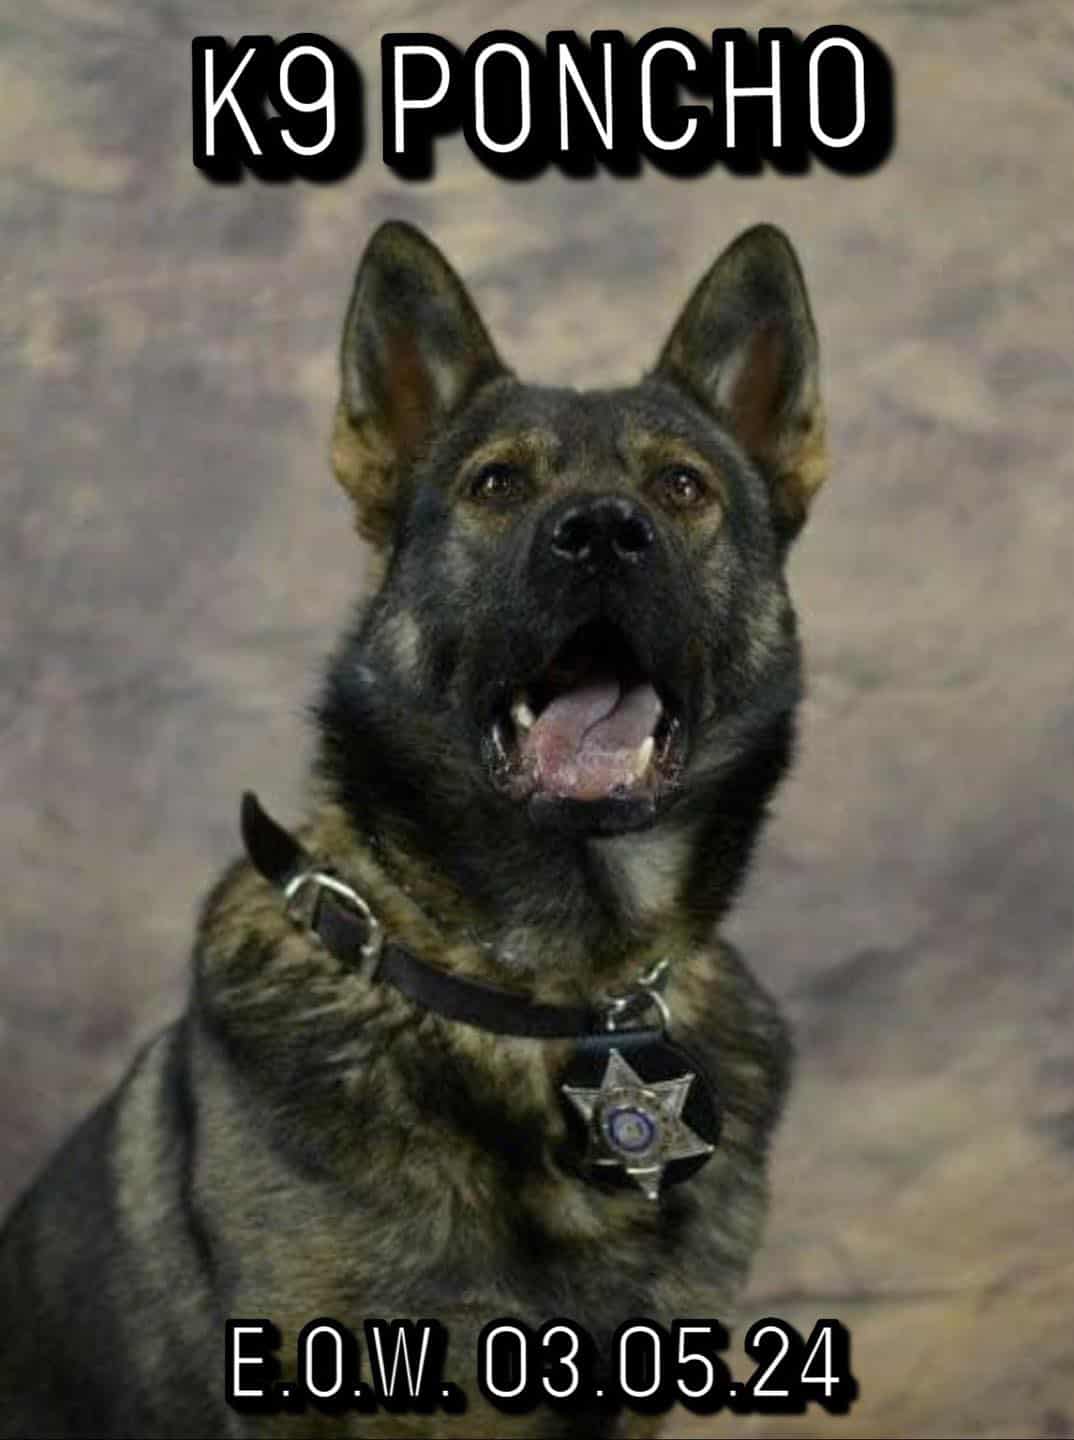 Lincoln County Sheriff’s Office announces passing of K9 Poncho